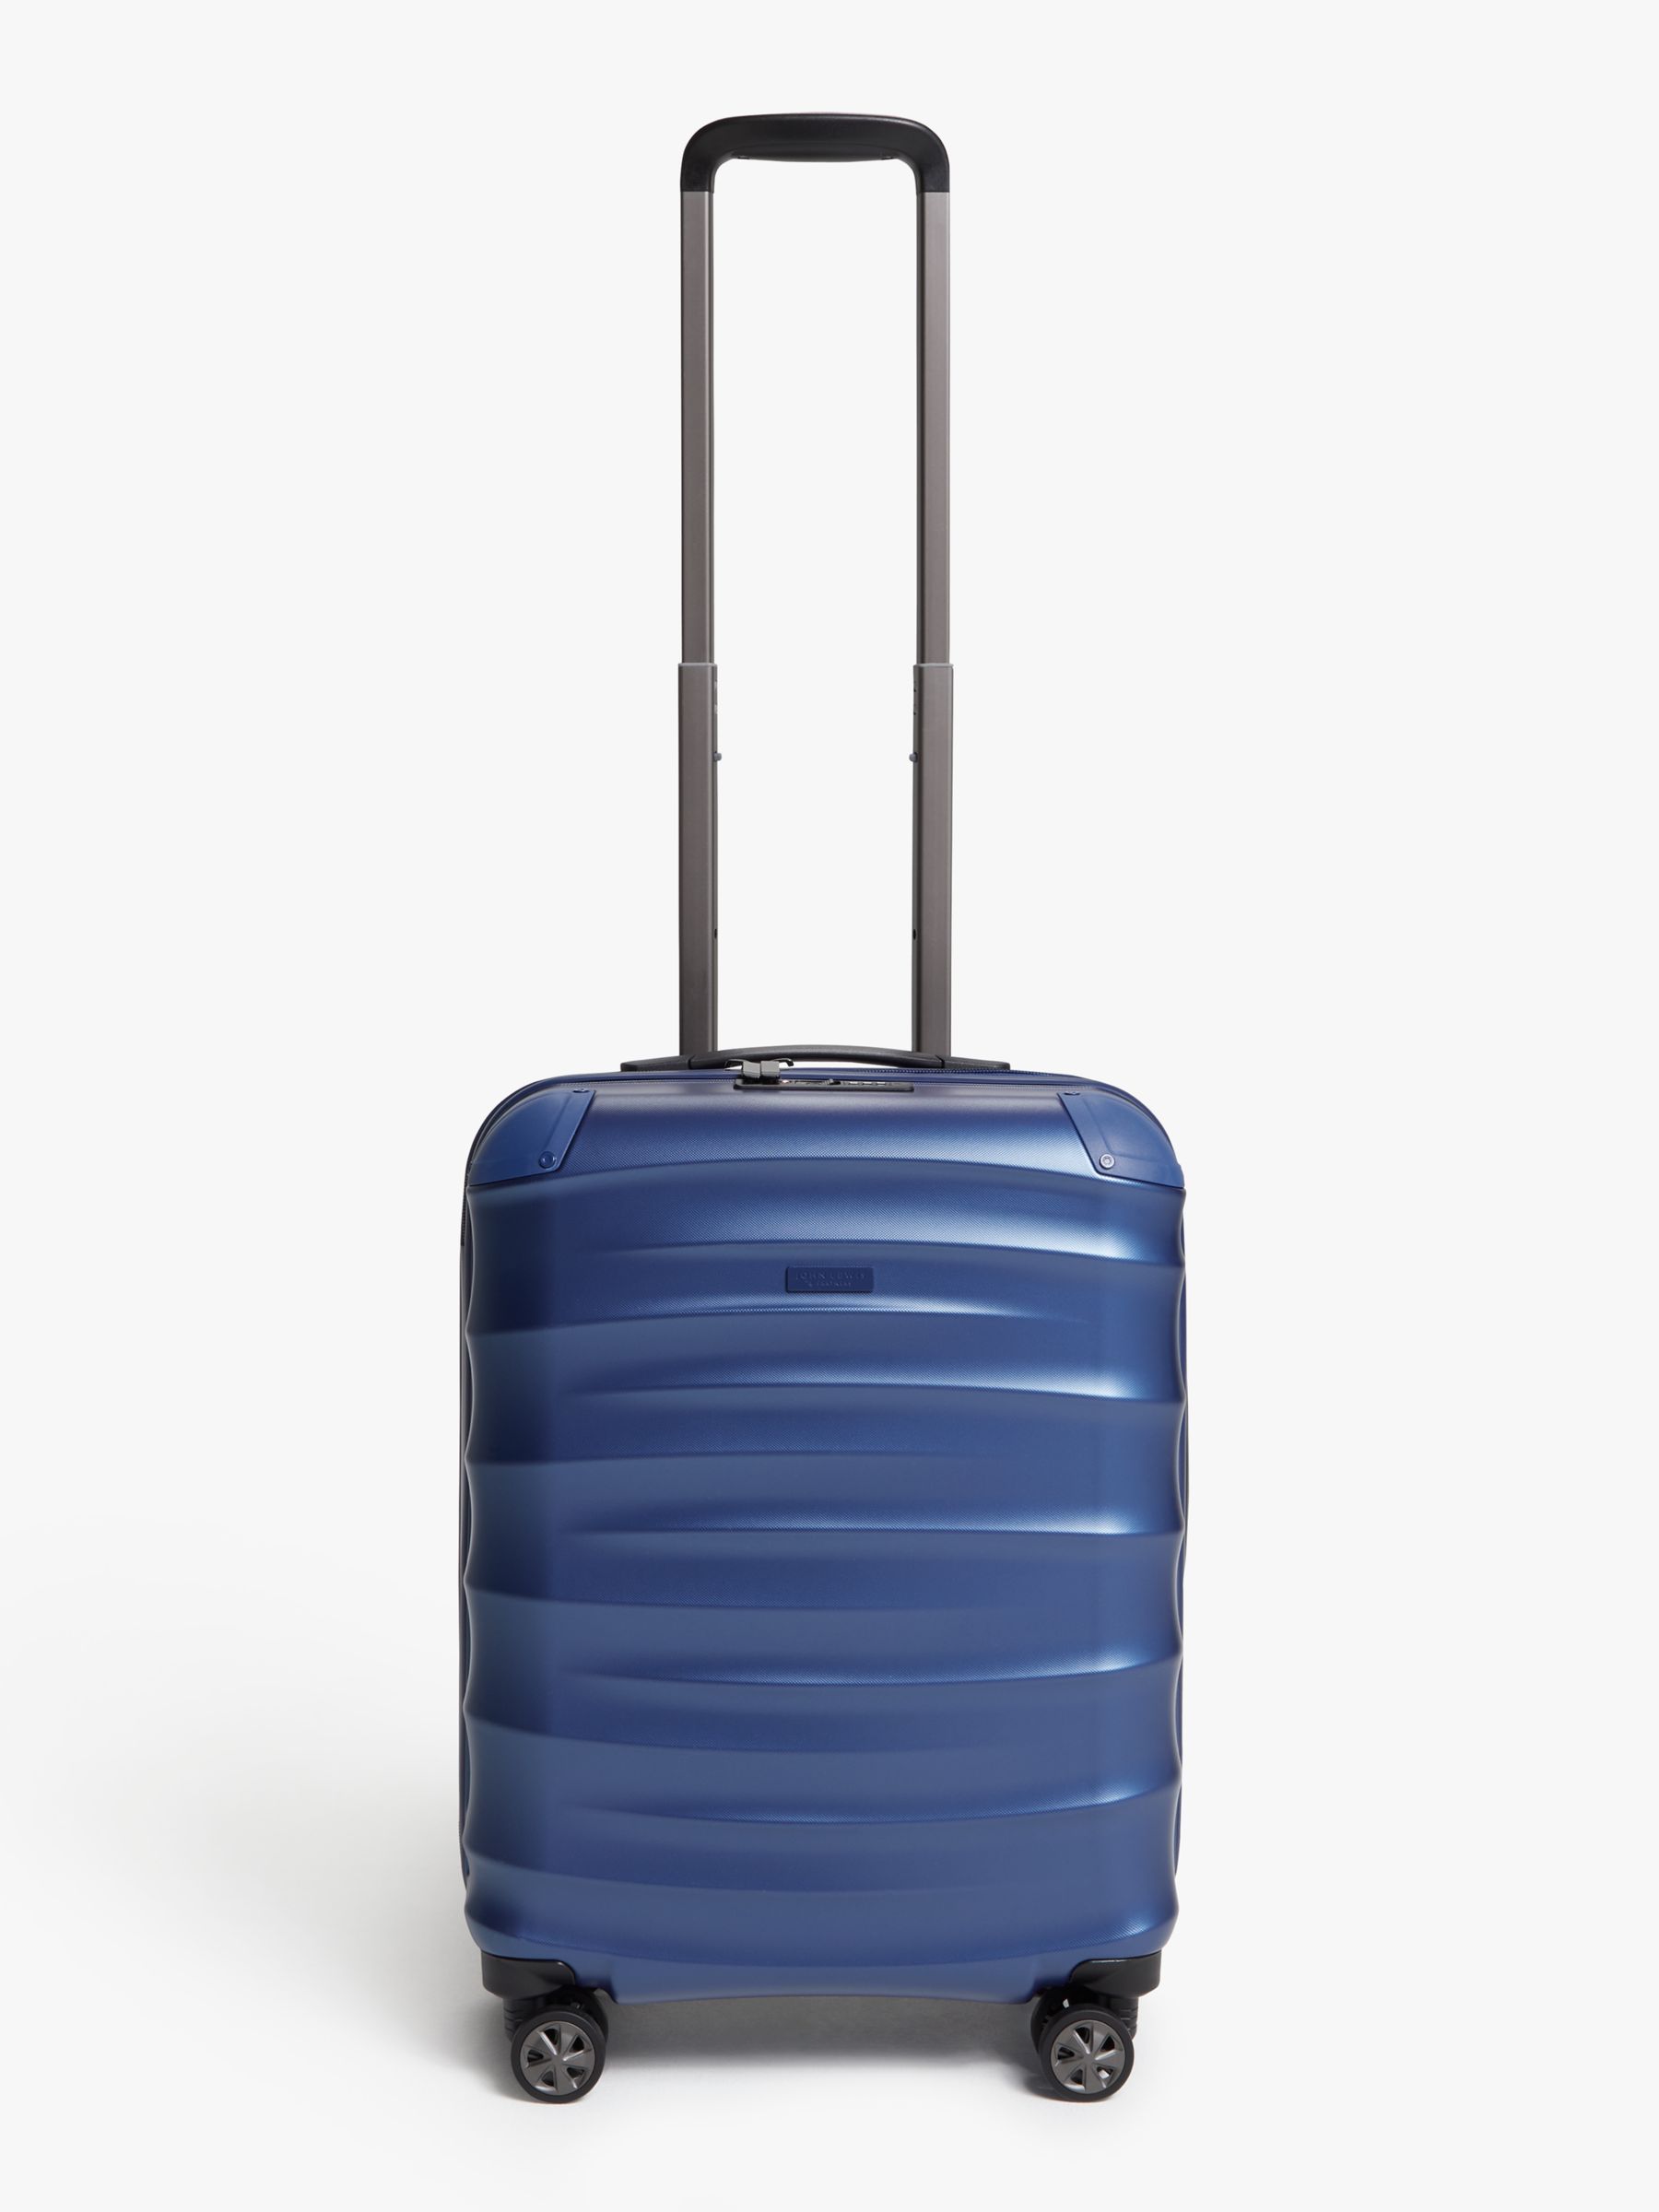 Hand Luggage Bags | Cabin Luggage | John Lewis & Partners